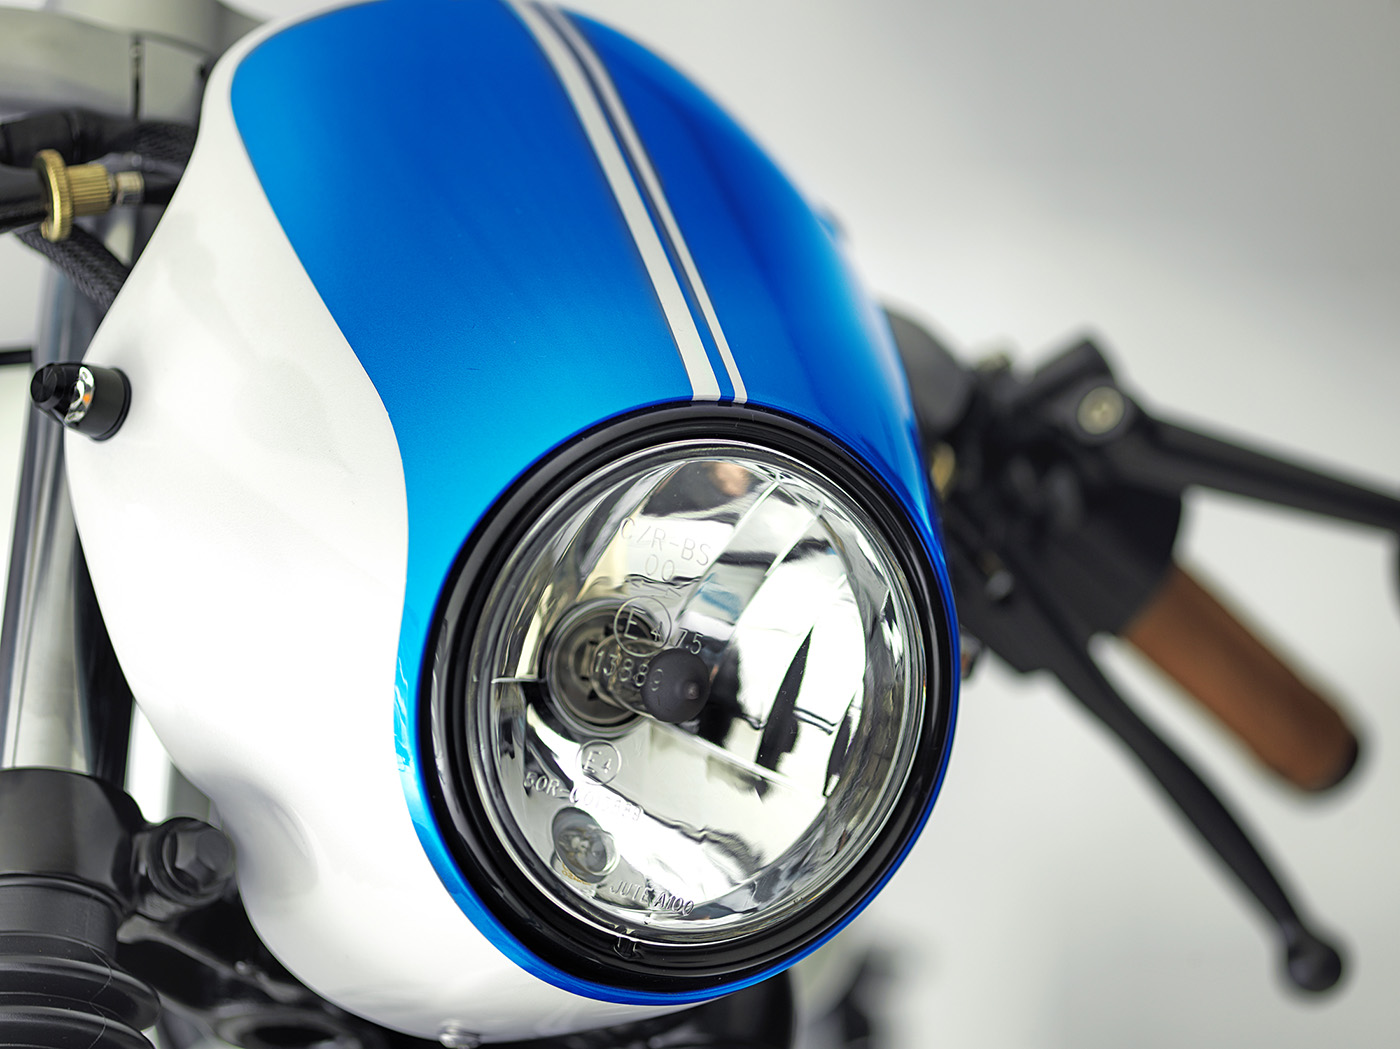 What are motorcycle fairings made of?